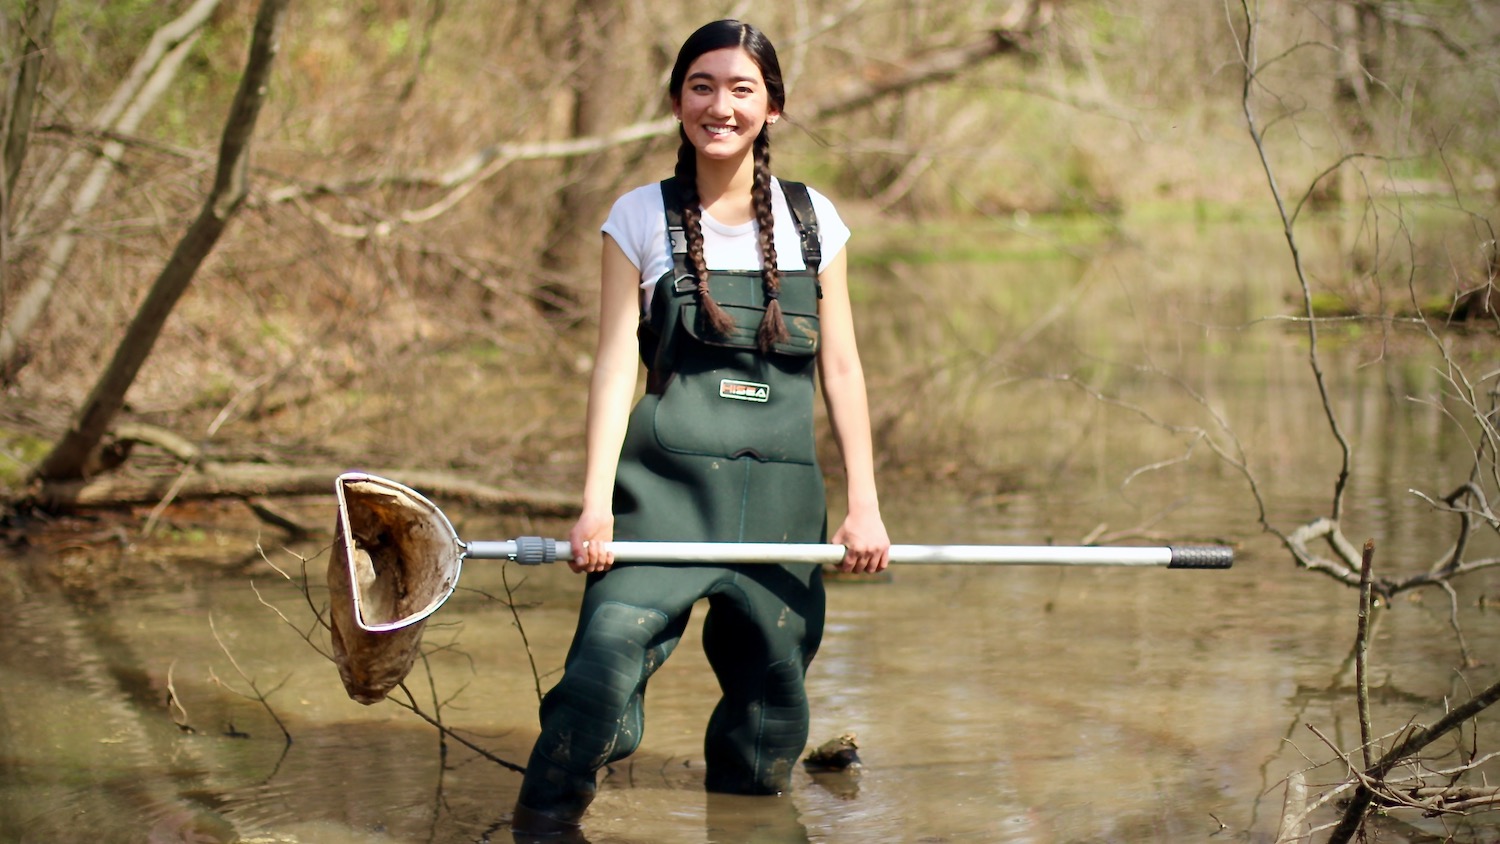 A young woman wearing waters stands in a pond holding a net.